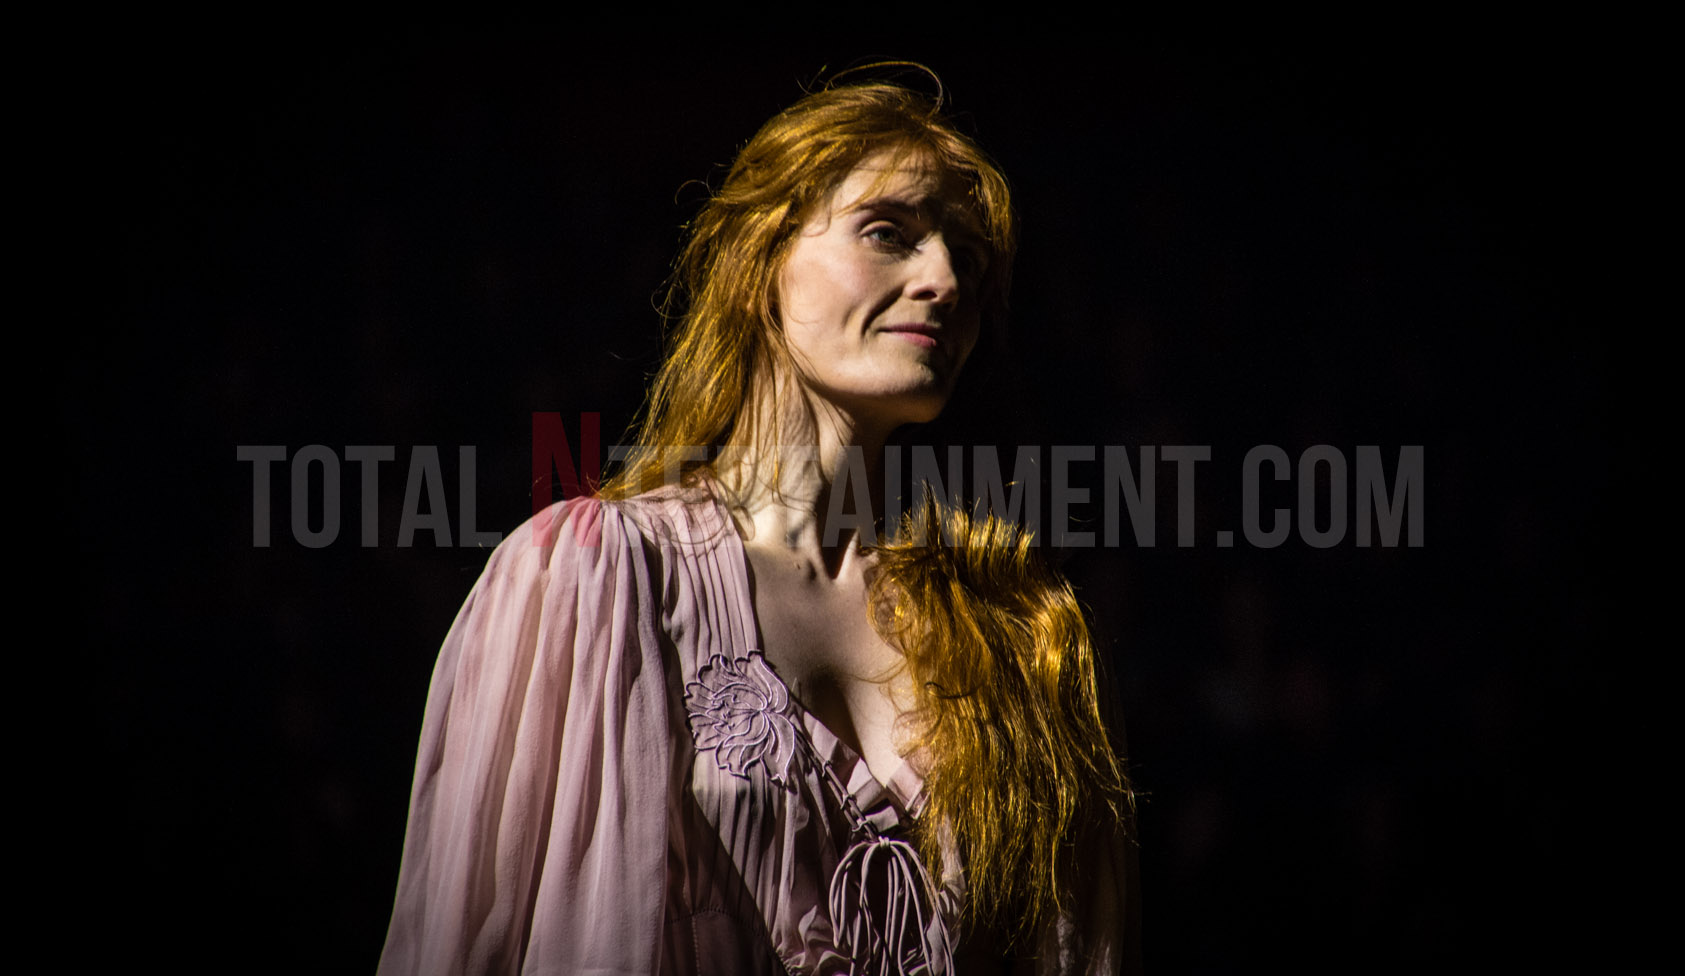 Florence & The Machine, Manchester, TotalNtertainment, Review, Chris Ryan